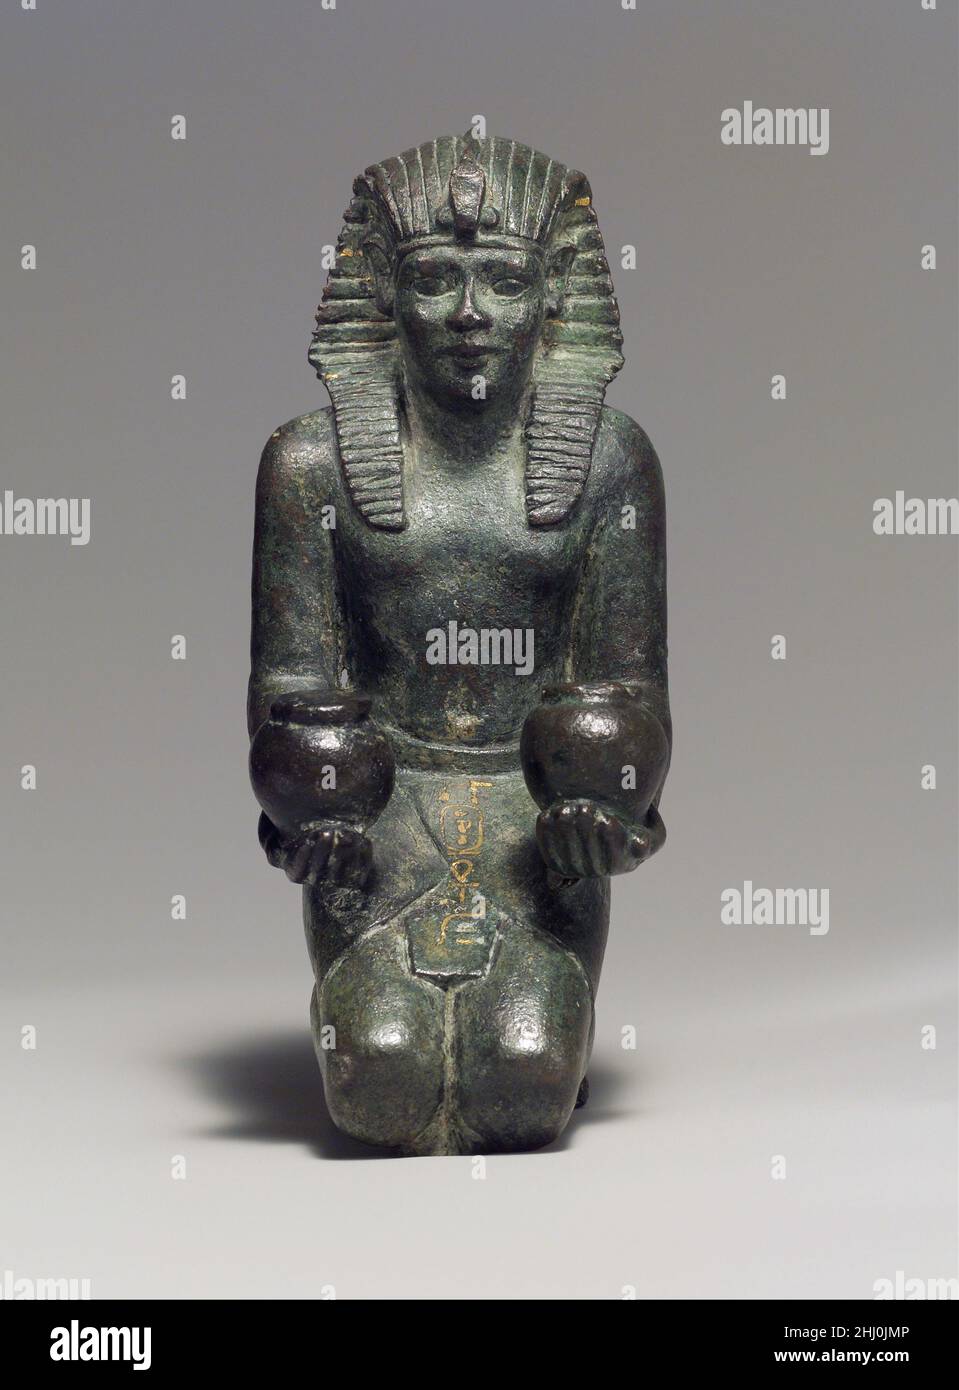 Kneeling statuette of King Amasis 570–526 B.C. Late Period, Saite The childlike appearance of this kneeling statuette, with its large head, beautiful features, plump body, and short legs, is characteristic of some metal royal statues made during the Late Period, when the king was associated with juvenile gods such as Horus, son of Isis. This work, like the stone statuary from the reign of Amasis, testifies to the high level of artistry attained during his rule.The figure is solid-the body, limbs, and attributes were all integrally cast. Precious-metal leaf once covered the king's nemes; additi Stock Photo